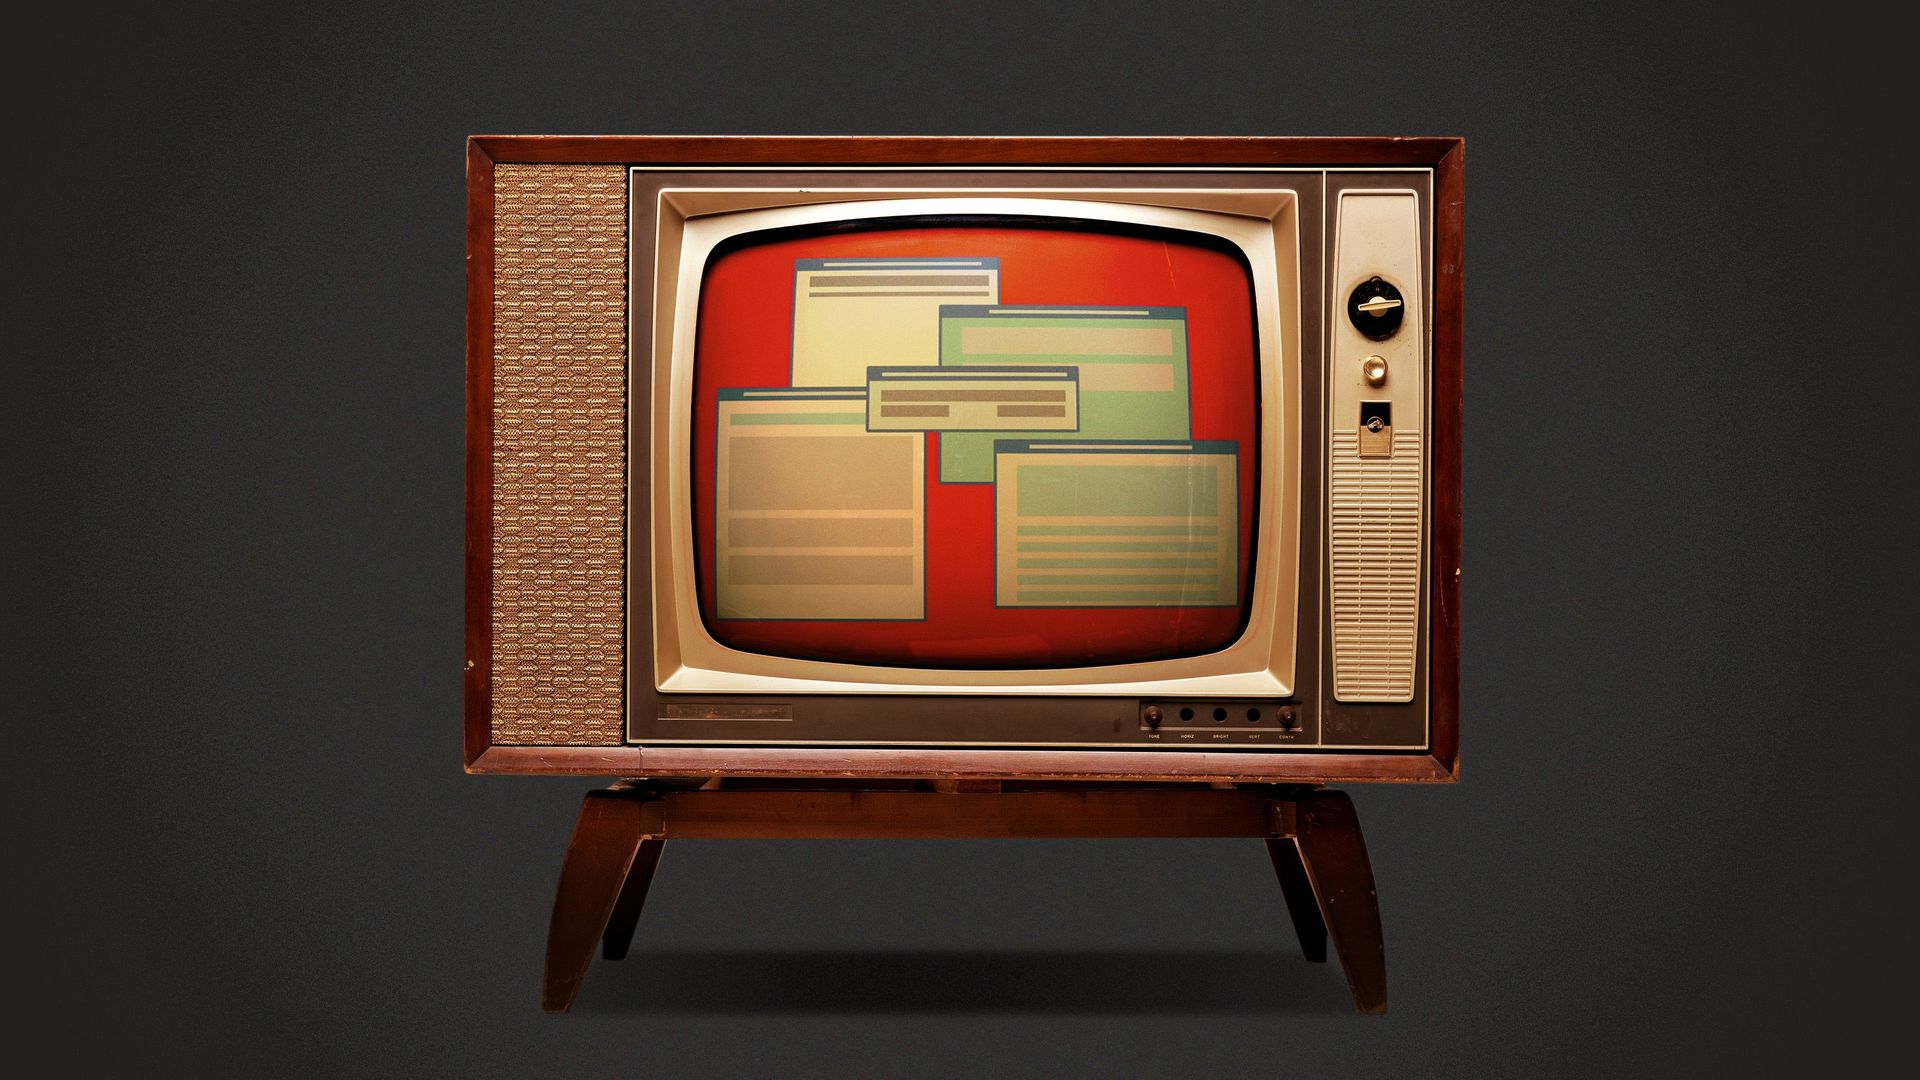 Illustration of an old TV with pop up ads covering the screen.